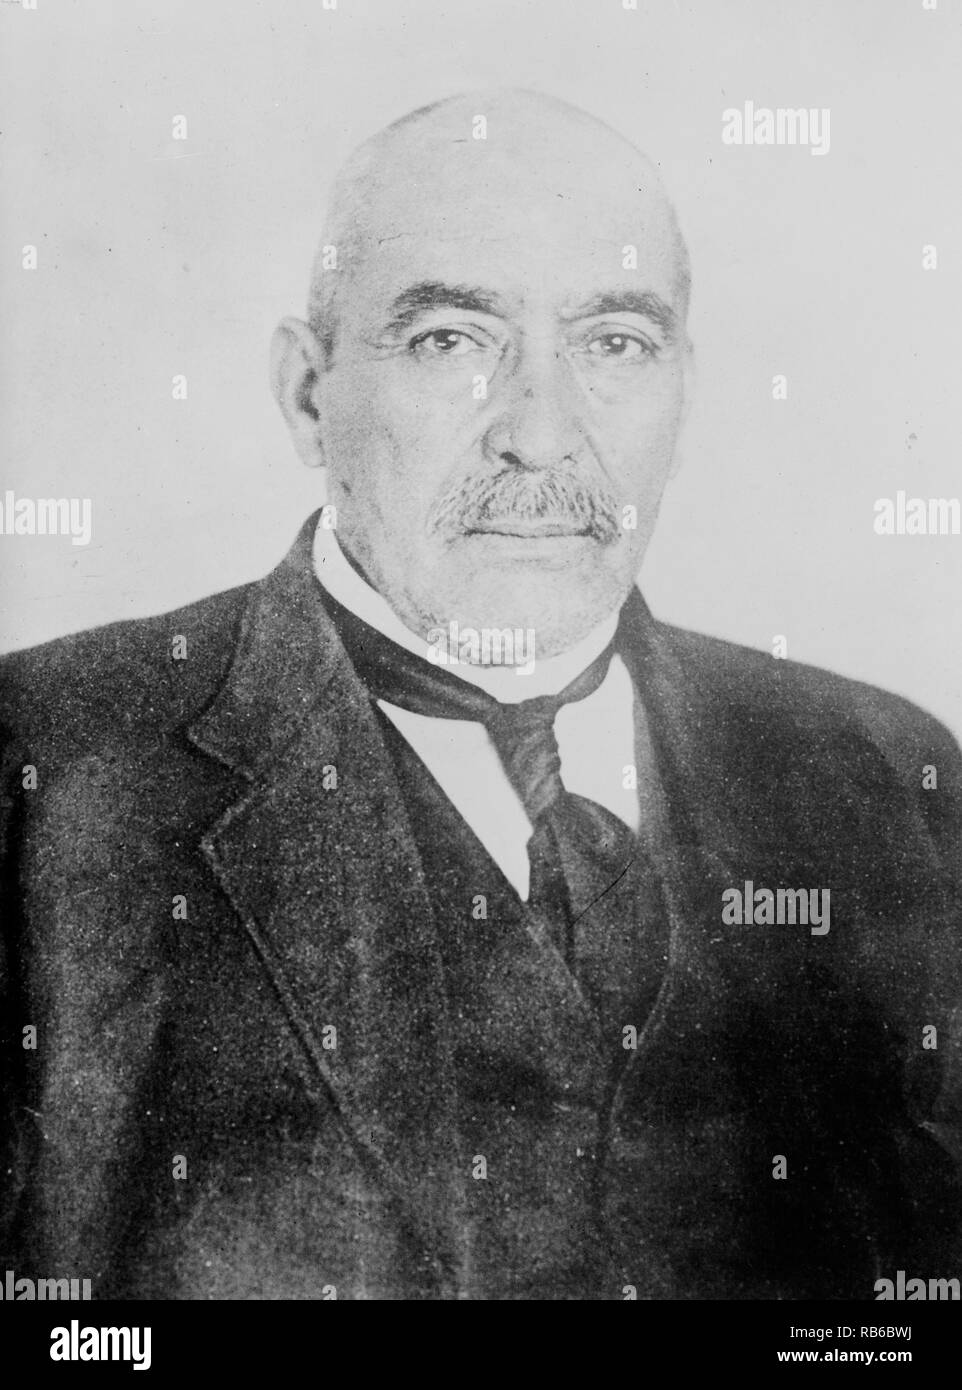 Victoriano Huerta, José Victoriano Huerta Márquez (1850 – 1916) Mexican military officer and 35th President of Mexico. Stock Photo